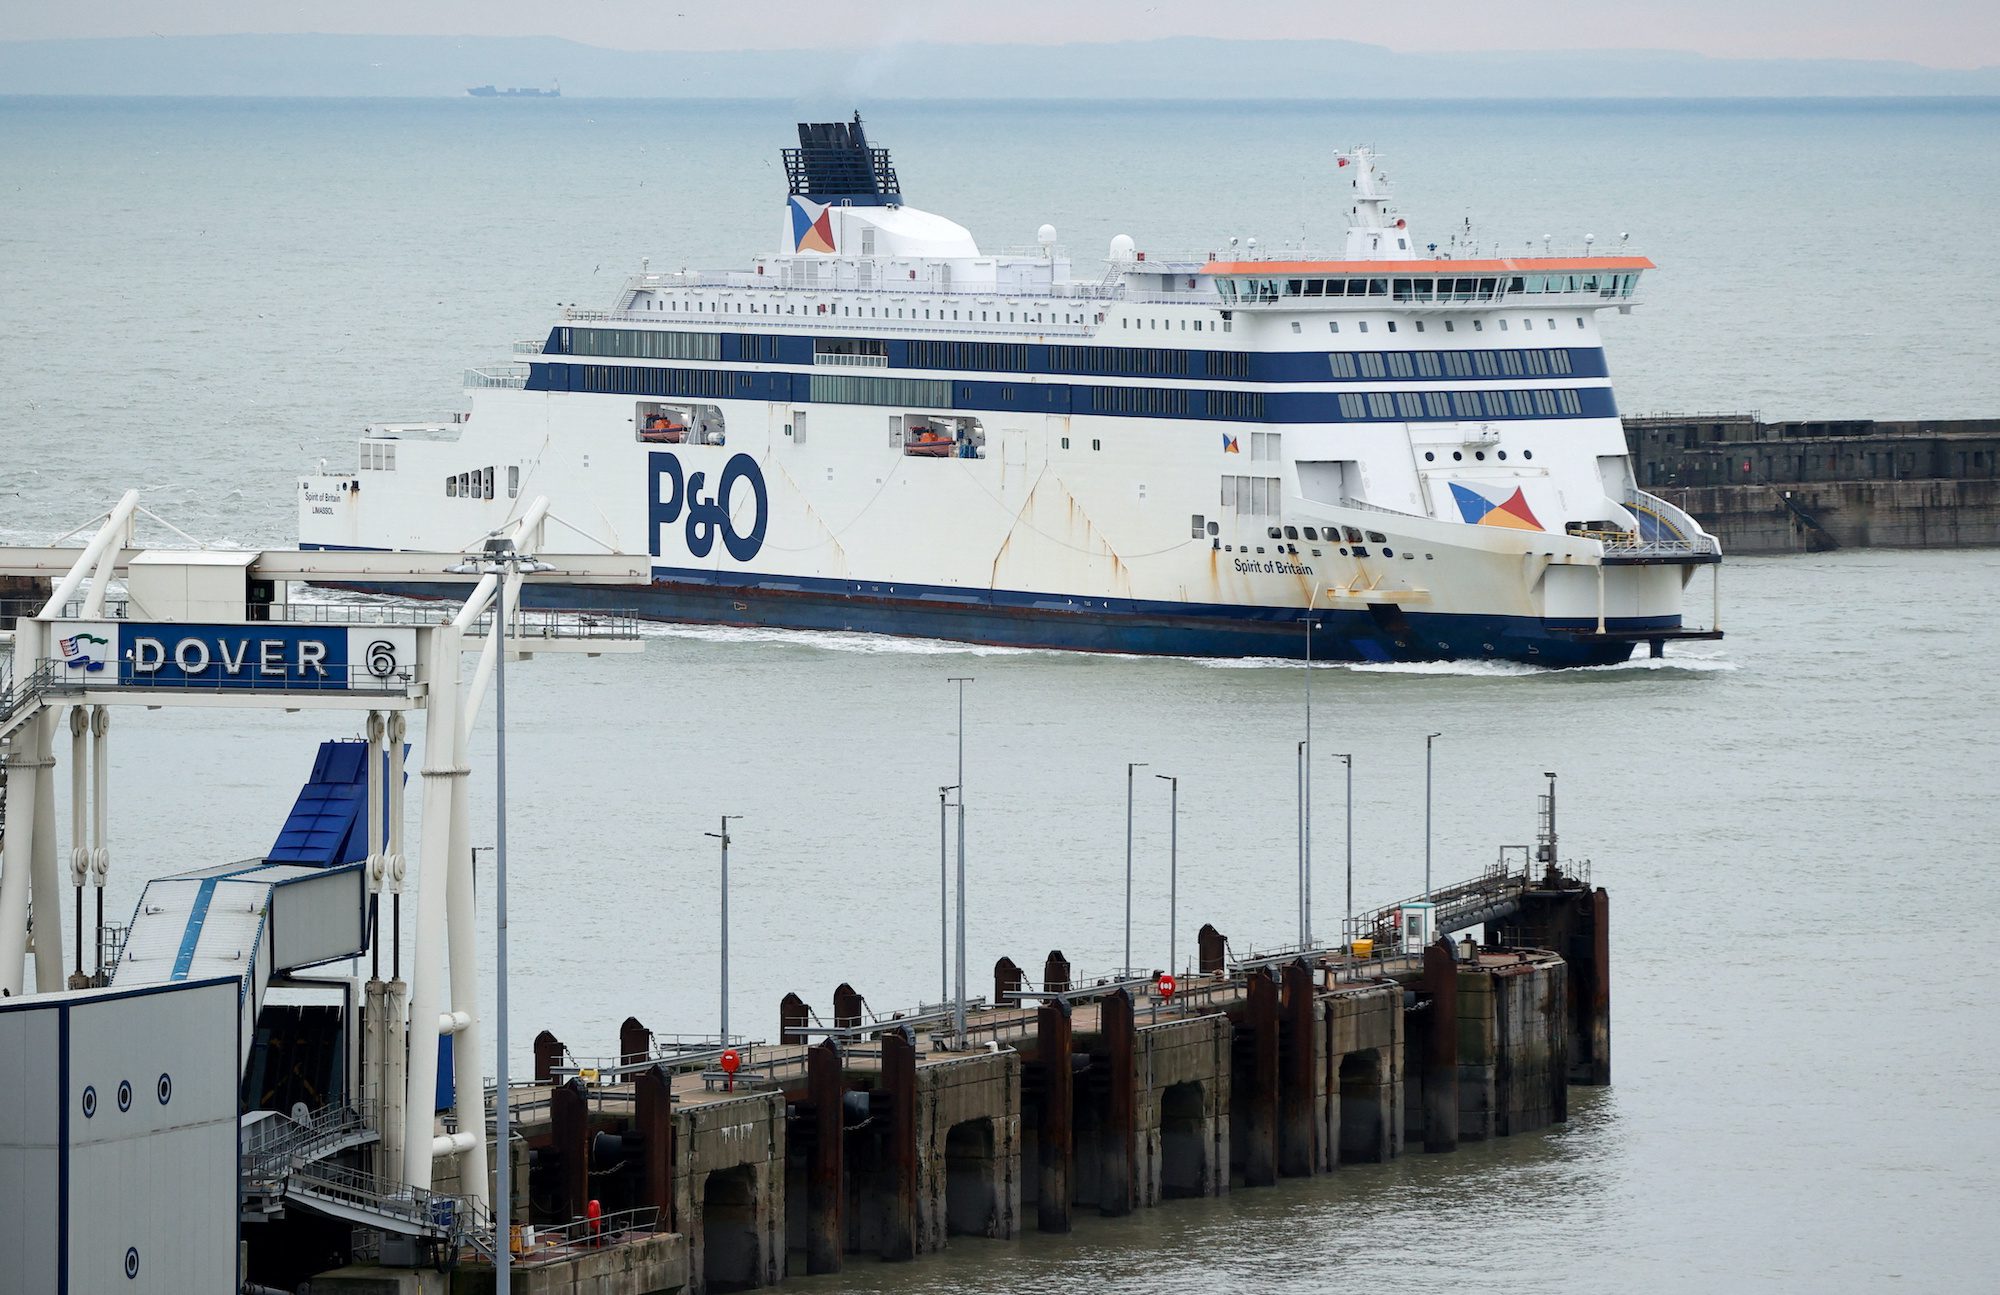 Britain to Force Ferry Operators to Pay Minimum Wage After P&O Debacle